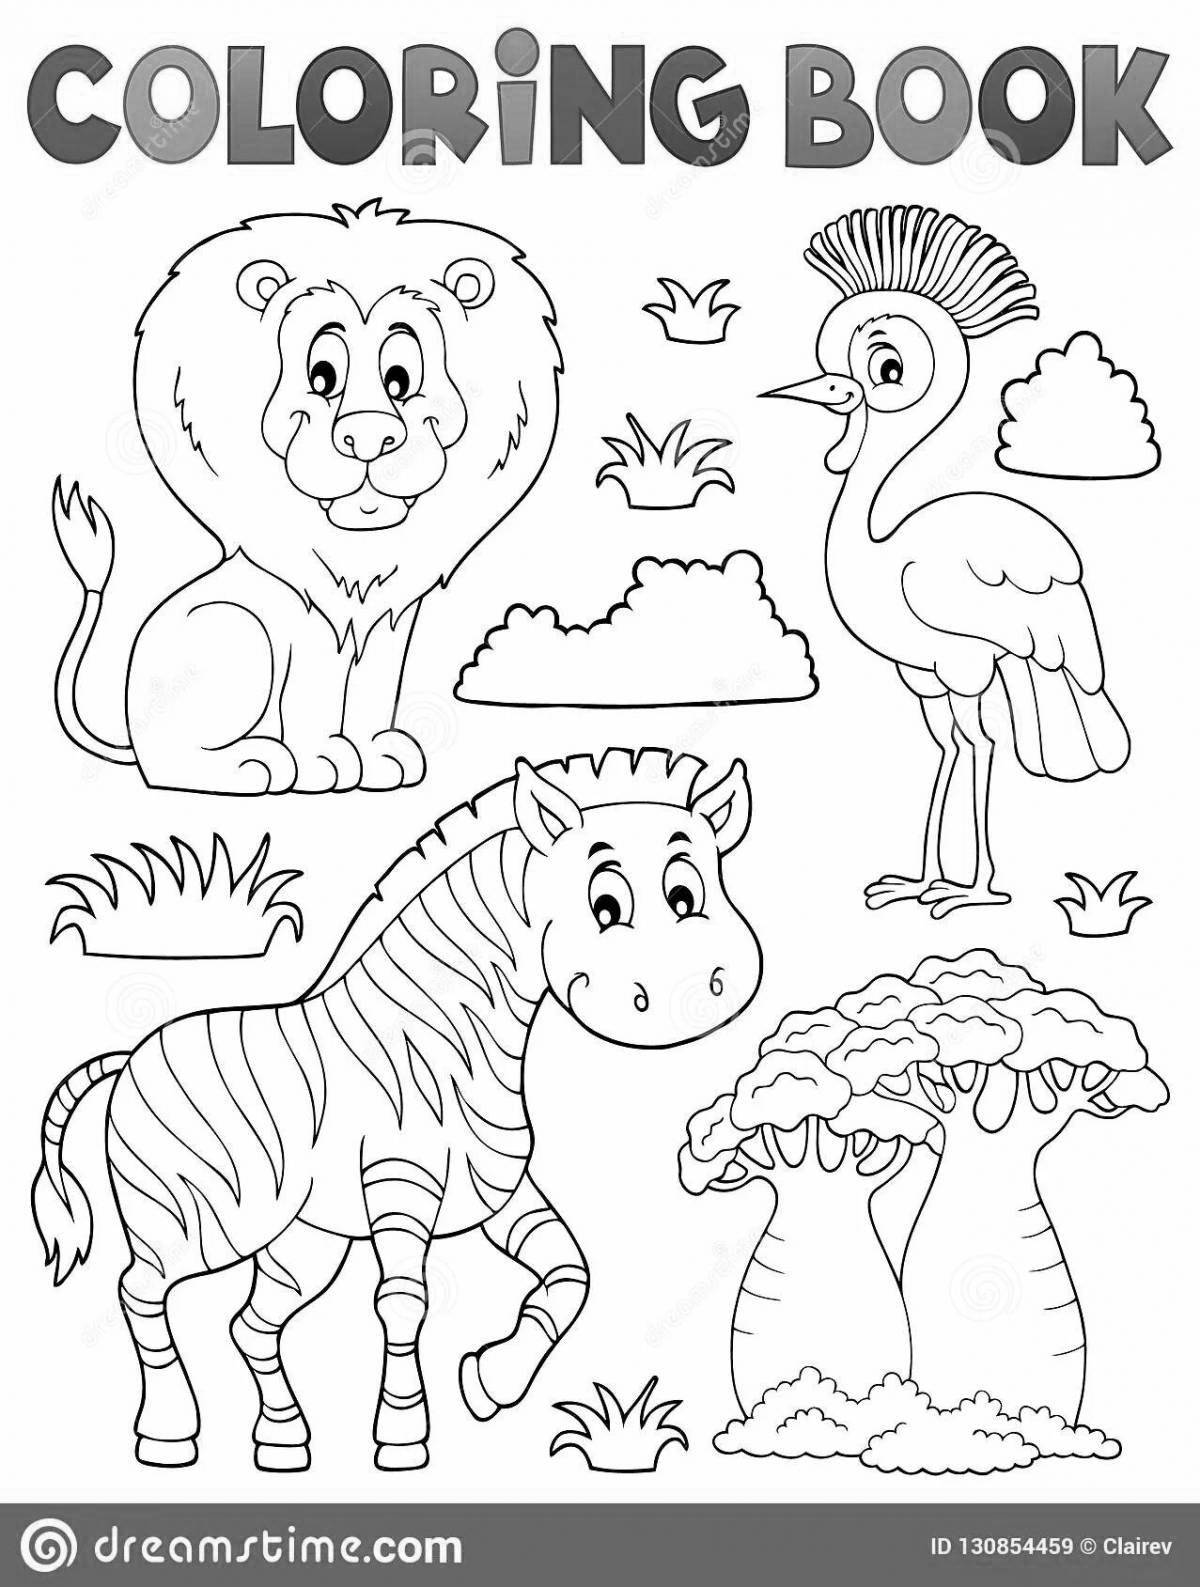 Unique african animals coloring page for 4-5 year olds